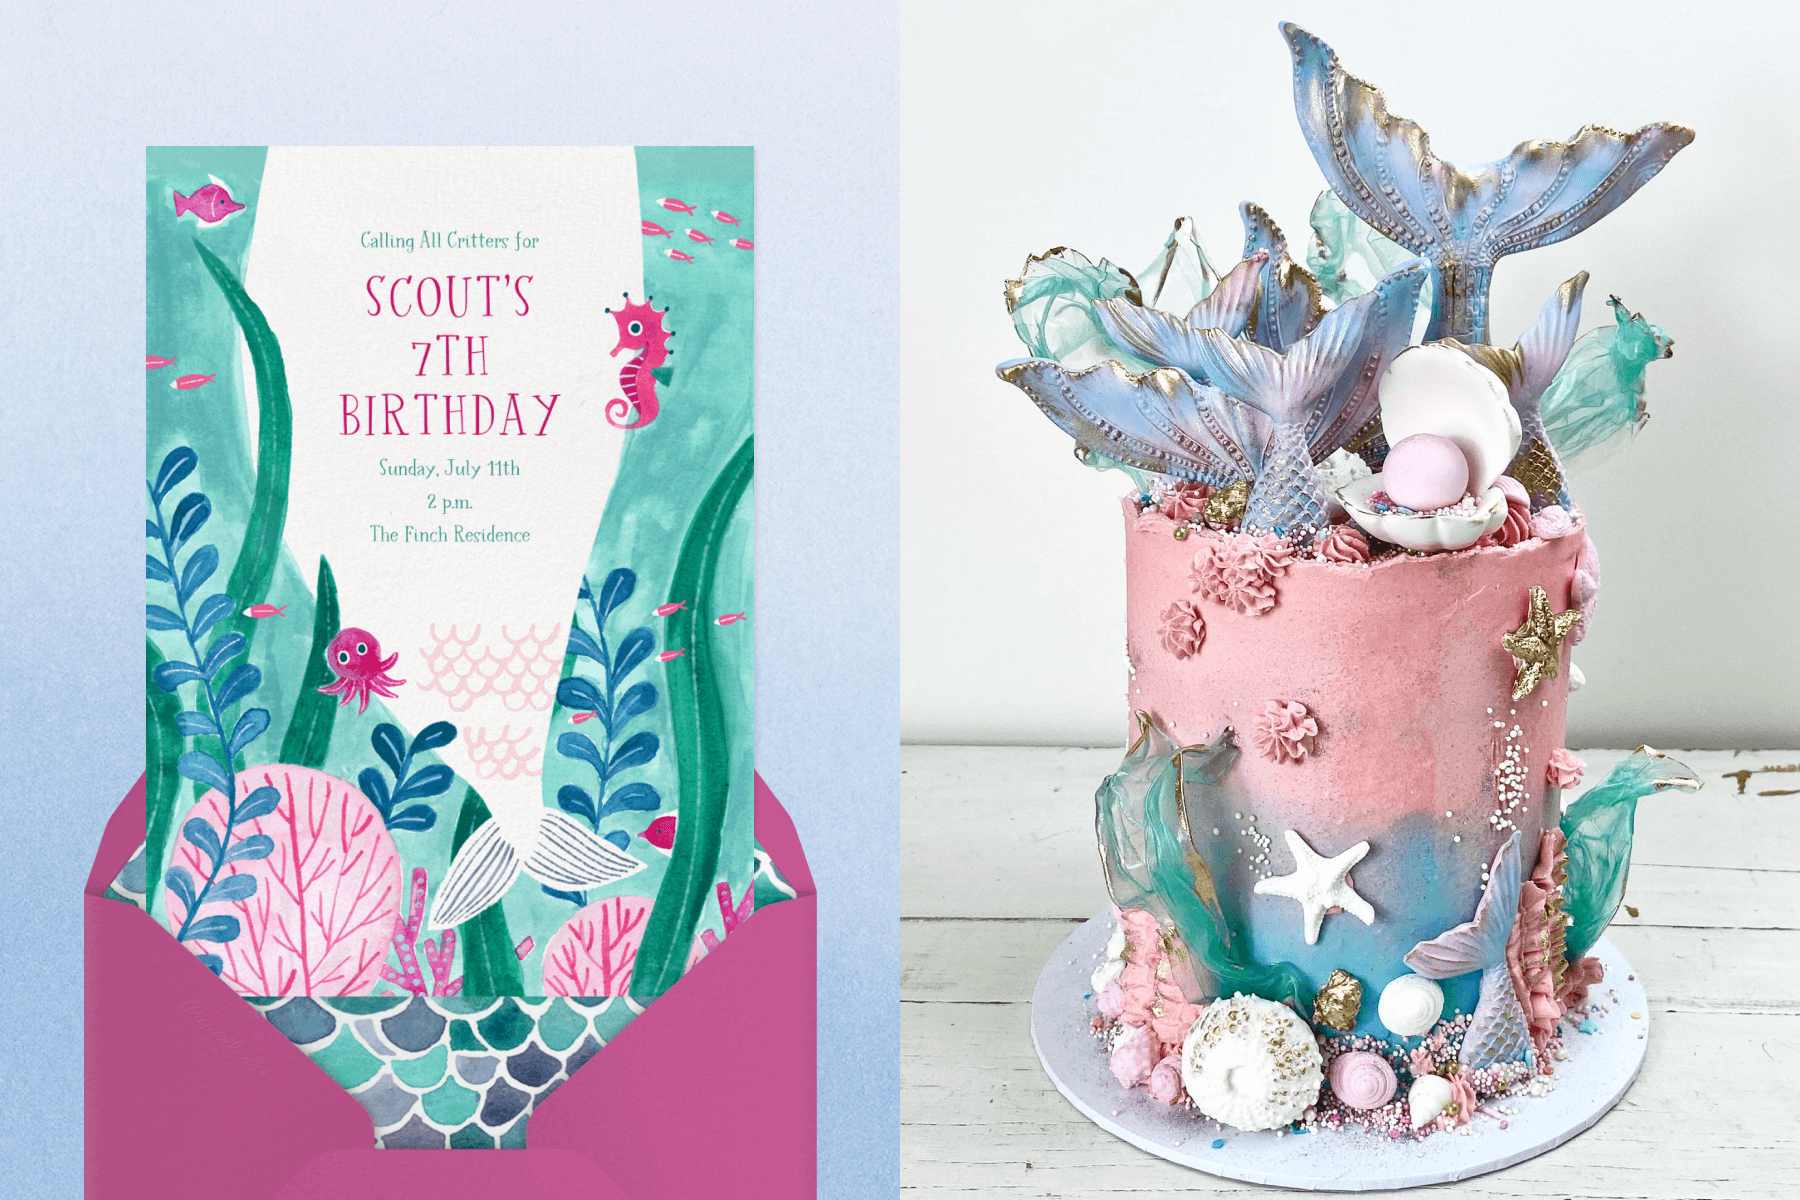 Invitation with an underwater scene and party details in a white mermaid tail; a pink cake with sea shells and mermaid tails on top.